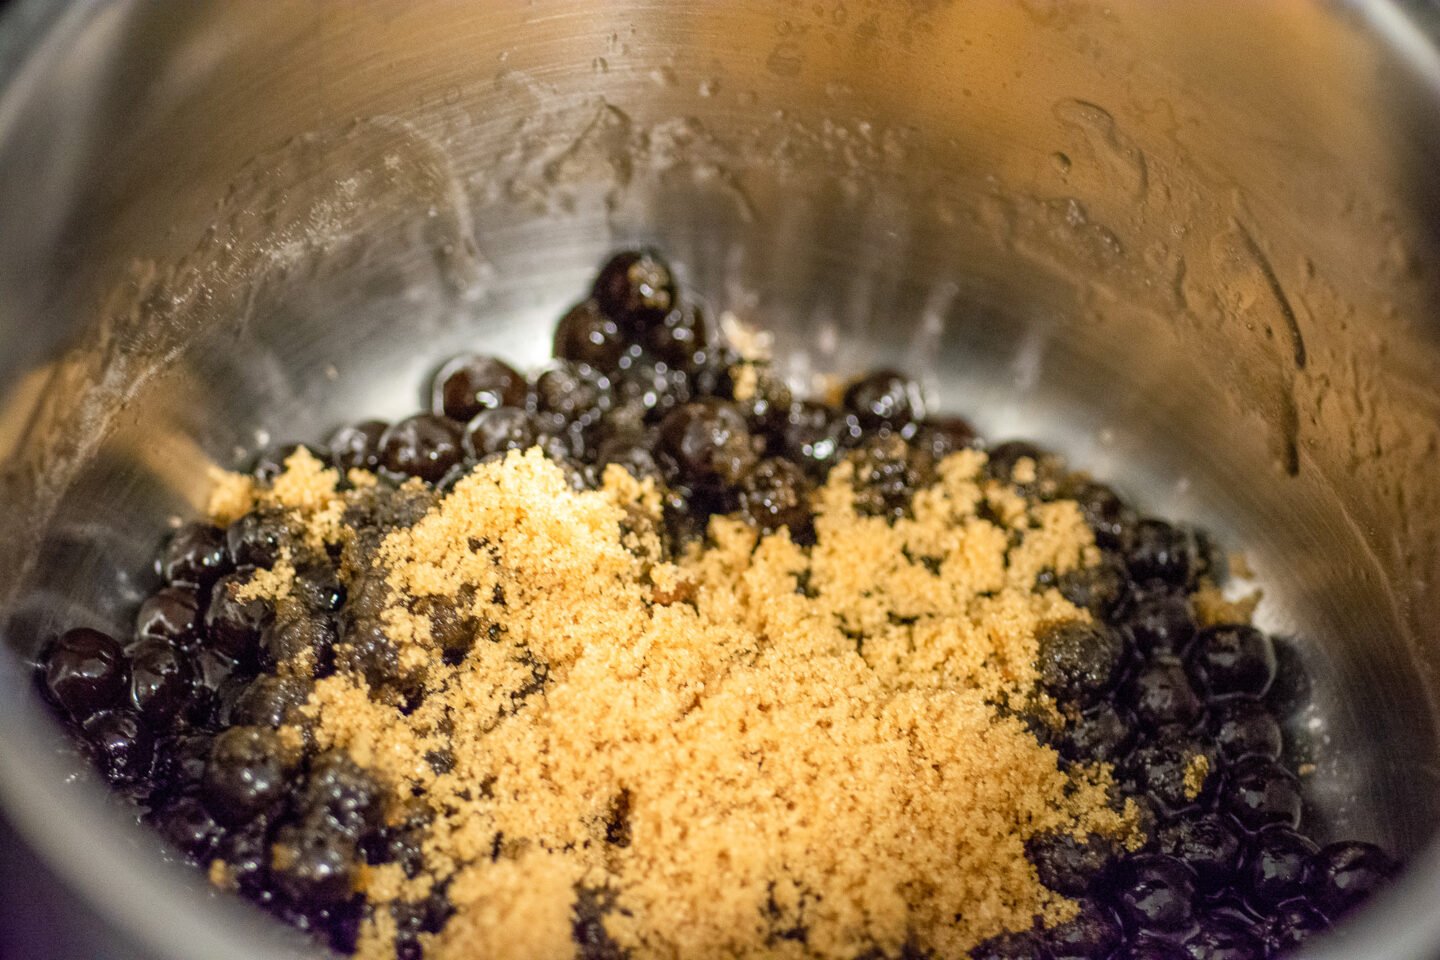 boba pearls cooked in brown sugar